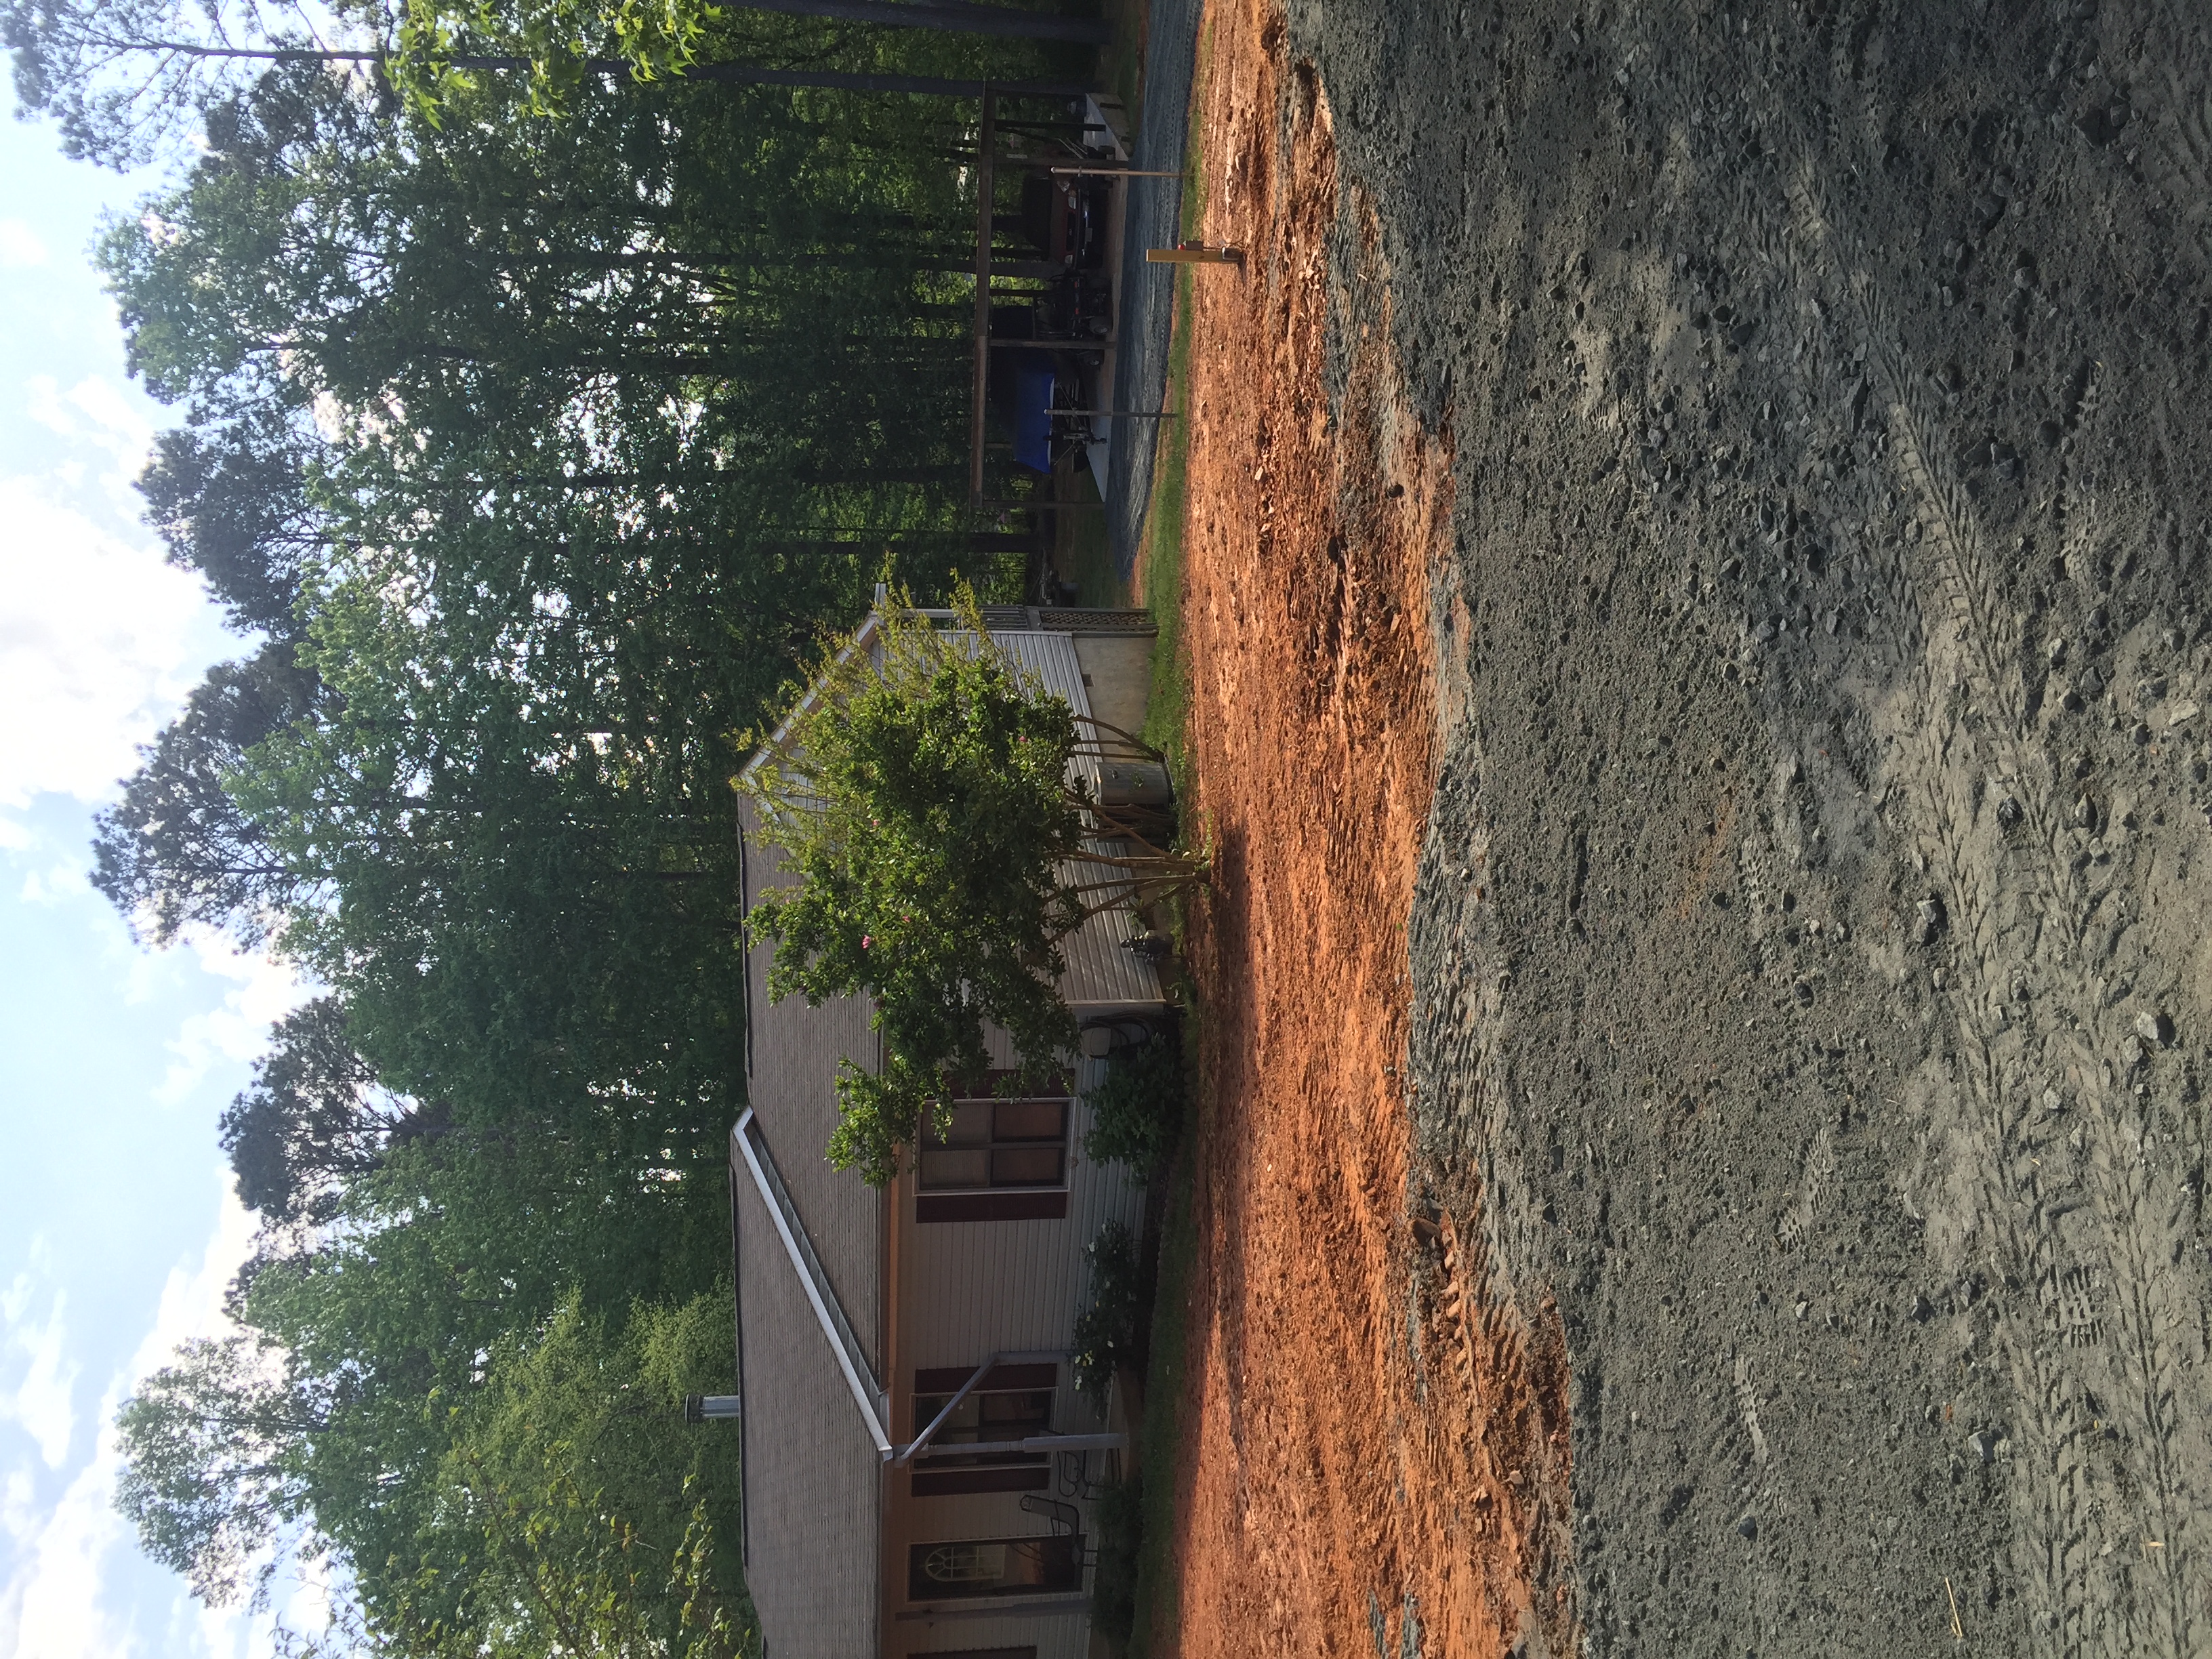 Pre-construction for a new concrete driveway in front of a home